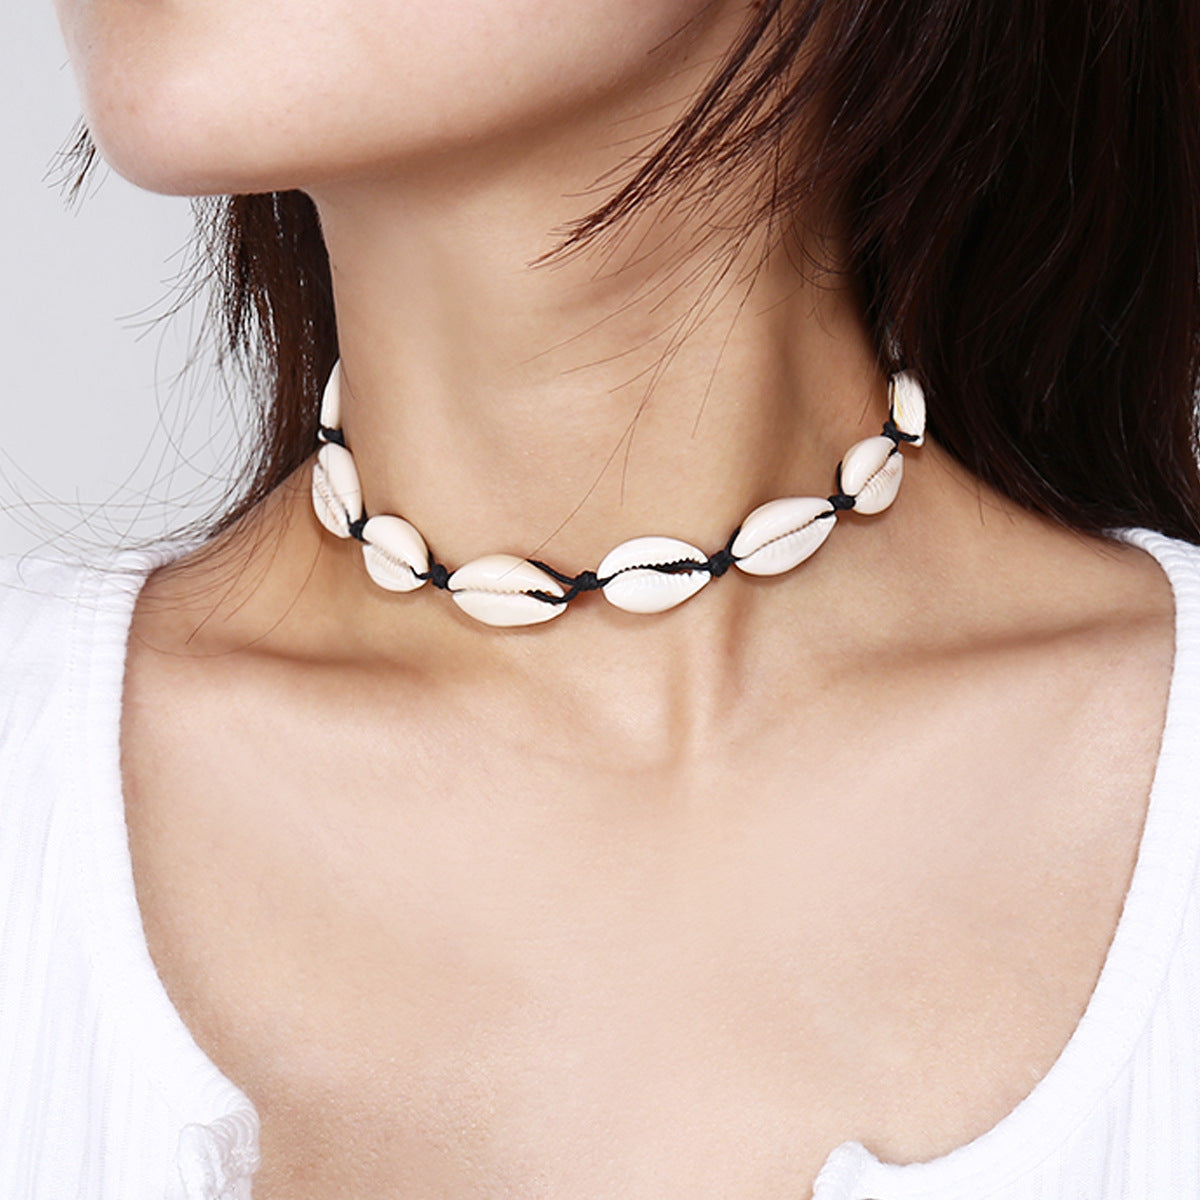 Casual Shell Handmade Clavicle Chain for Women-Necklaces-The same as picture-Free Shipping Leatheretro